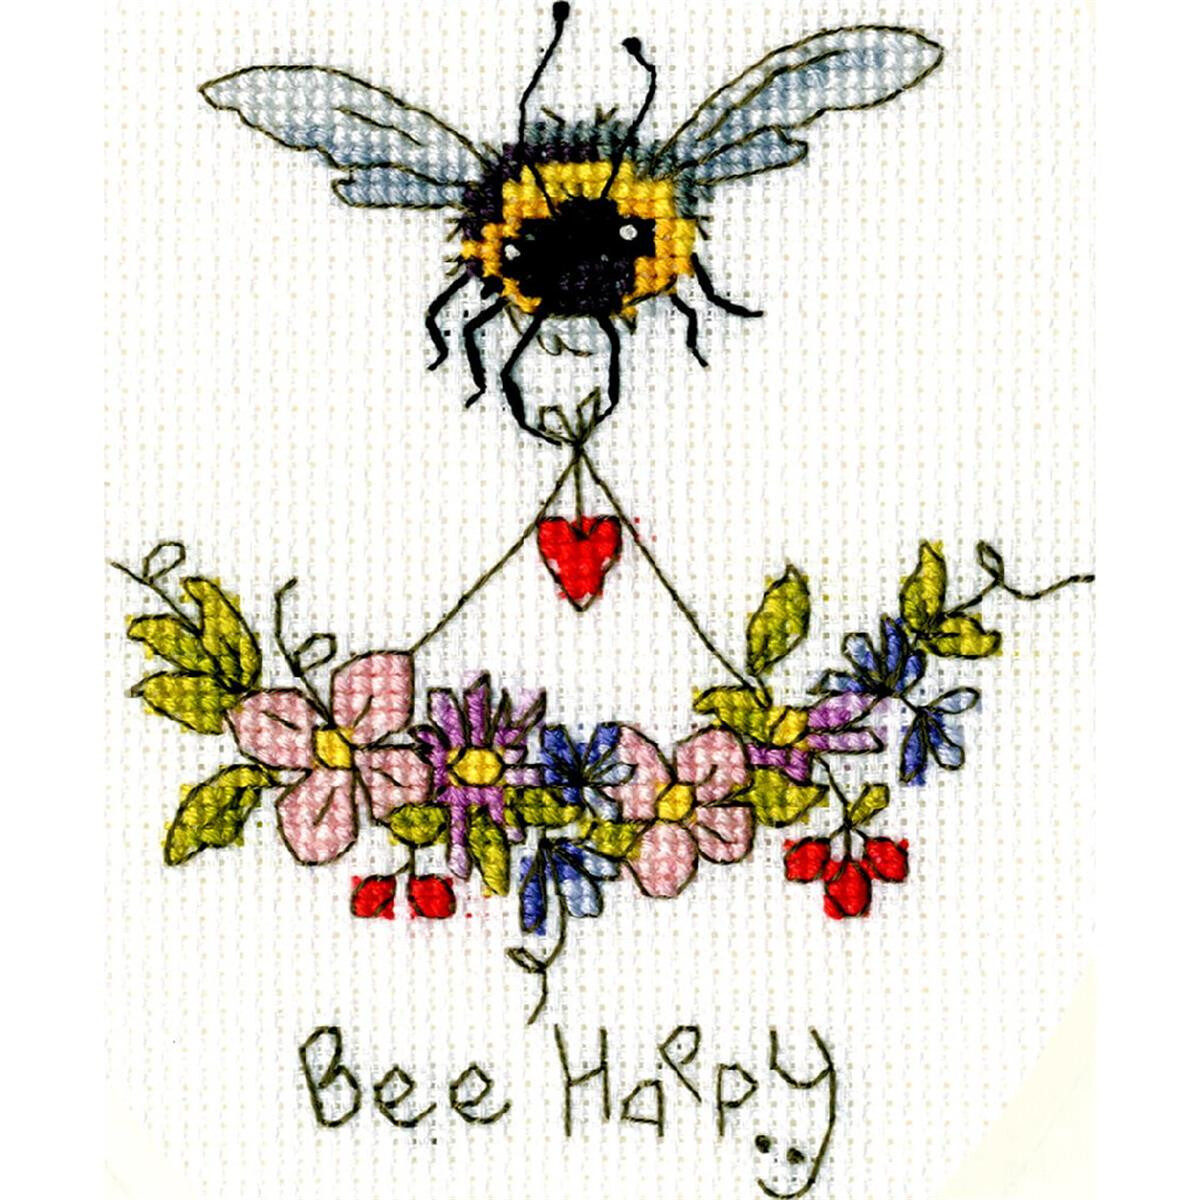 Bothy Threads  greating card counted cross stitch kit...